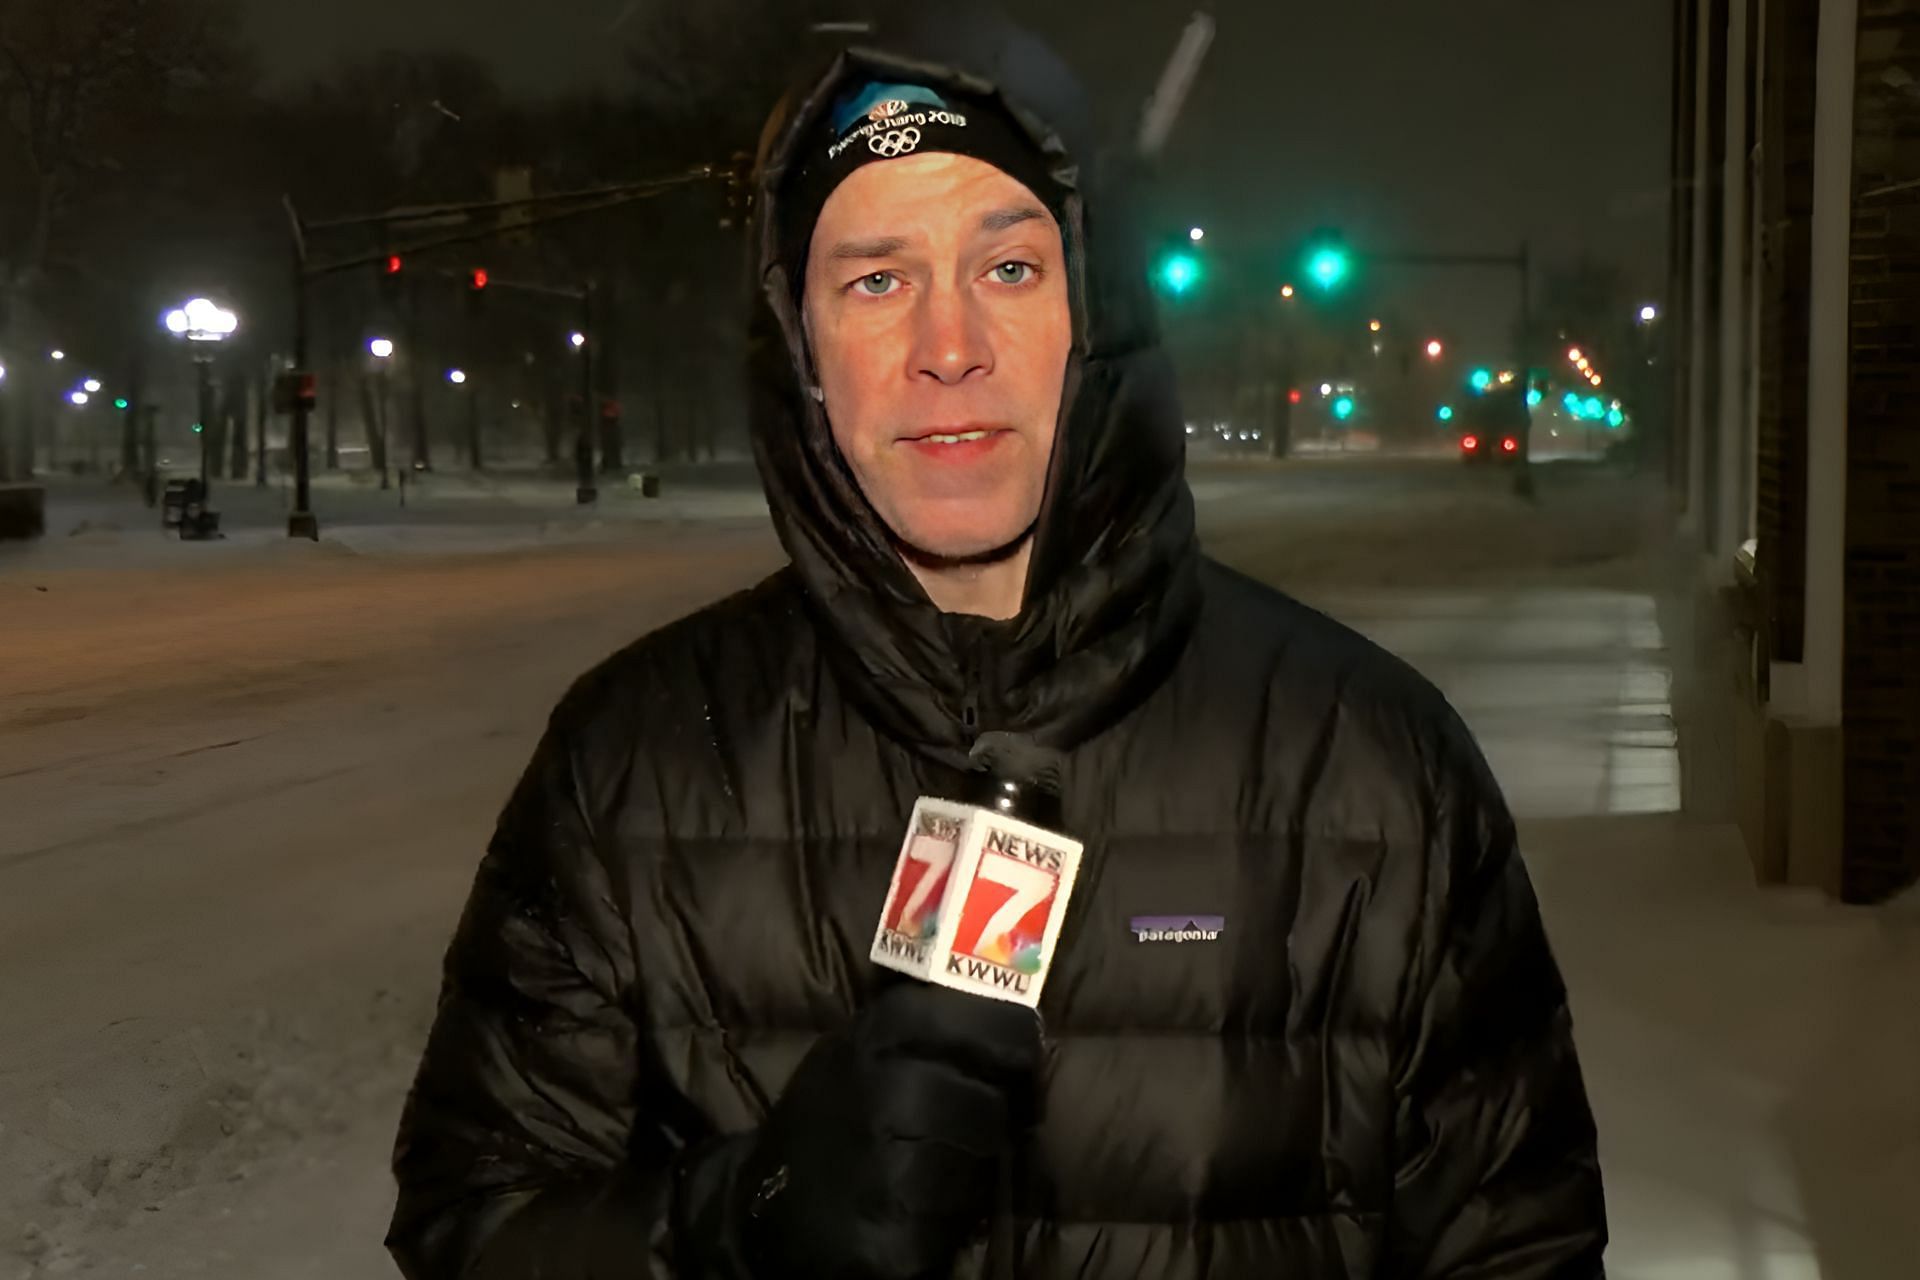 The News 7 KWWL sports reporter, Mark Woodley, tweeted a clip of him throwing shades for standing in for the weather guy (Image via Twitter/@MarkWoodleyTV)